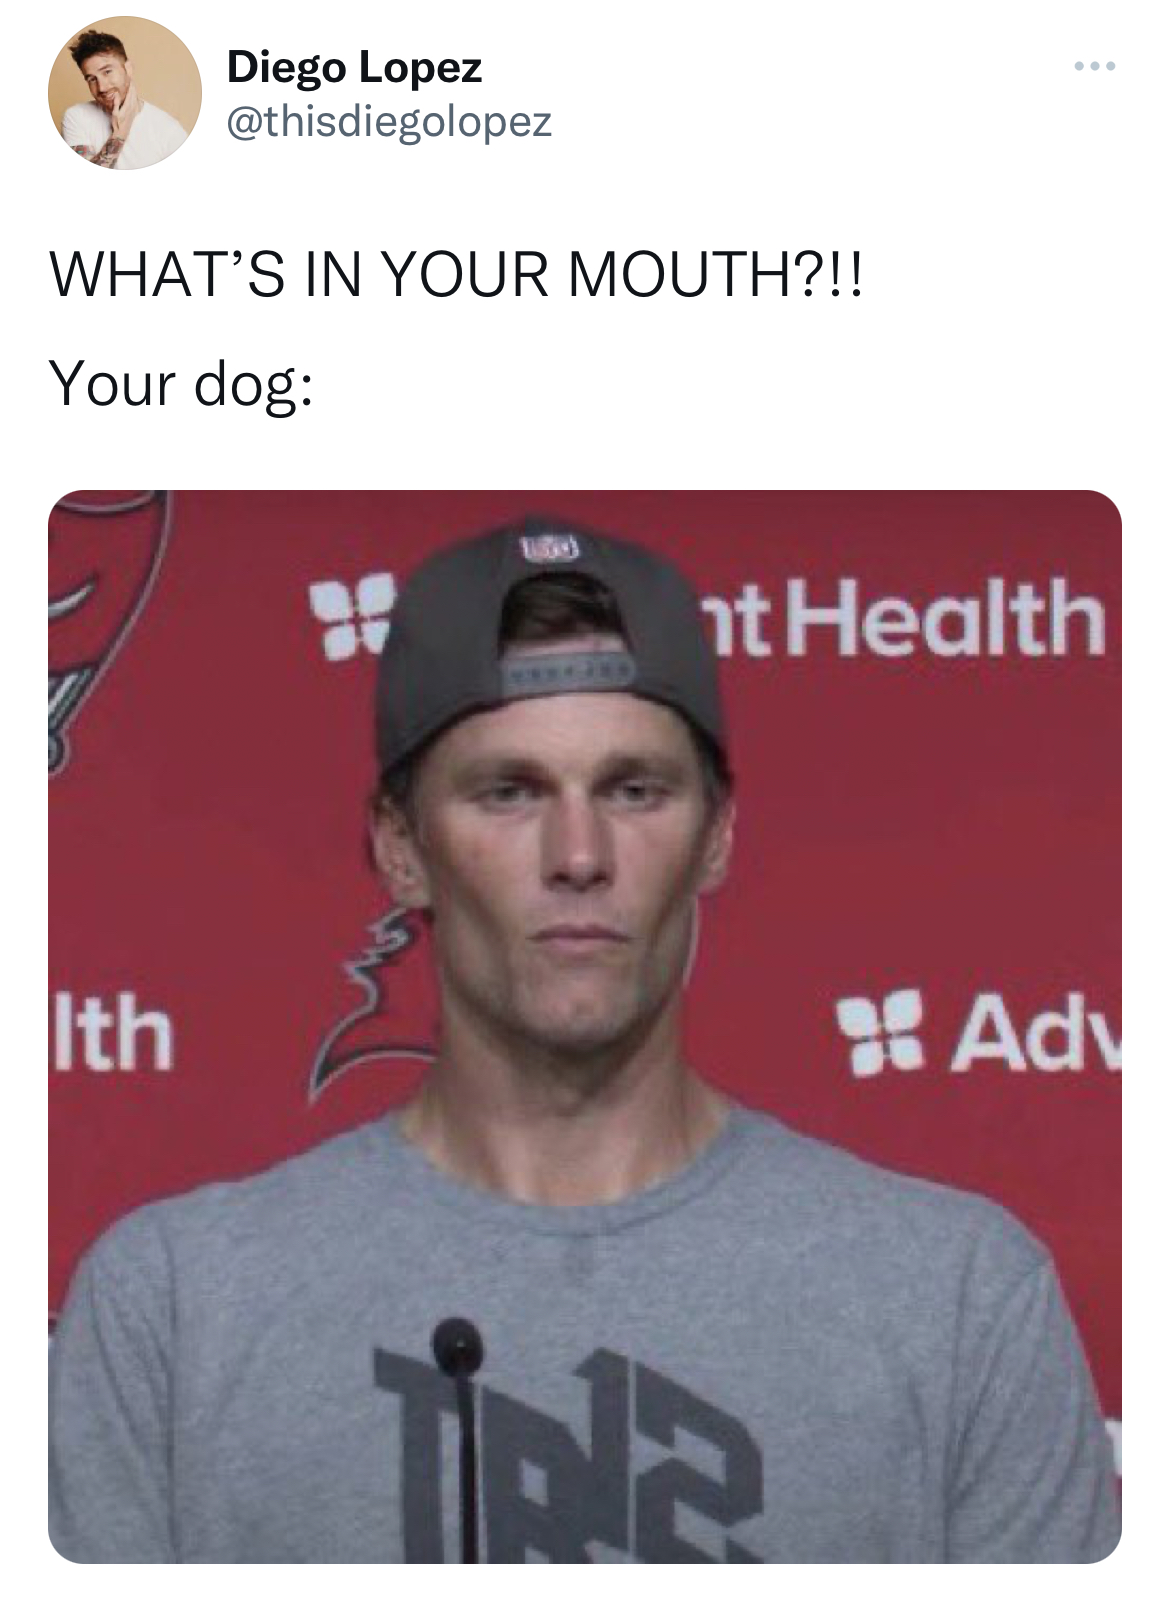 funny and dirty tweets - Tom Brady - Diego Lopez What'S In Your Mouth?!! Your dog Ith www nt Health iNE Adv